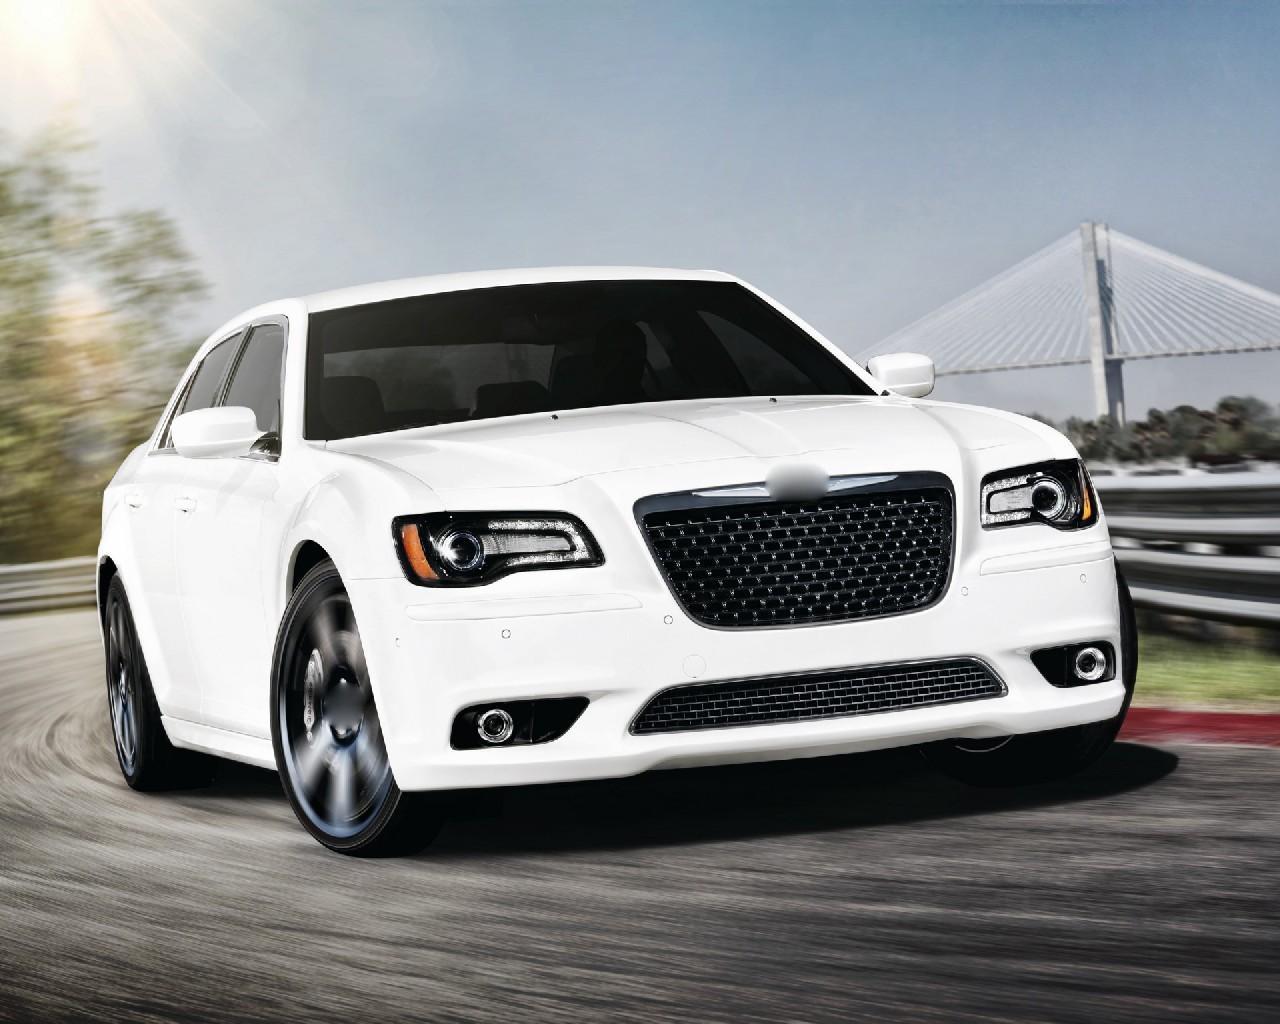 Wallpaper For Chrysler 300c For Android Apk Download